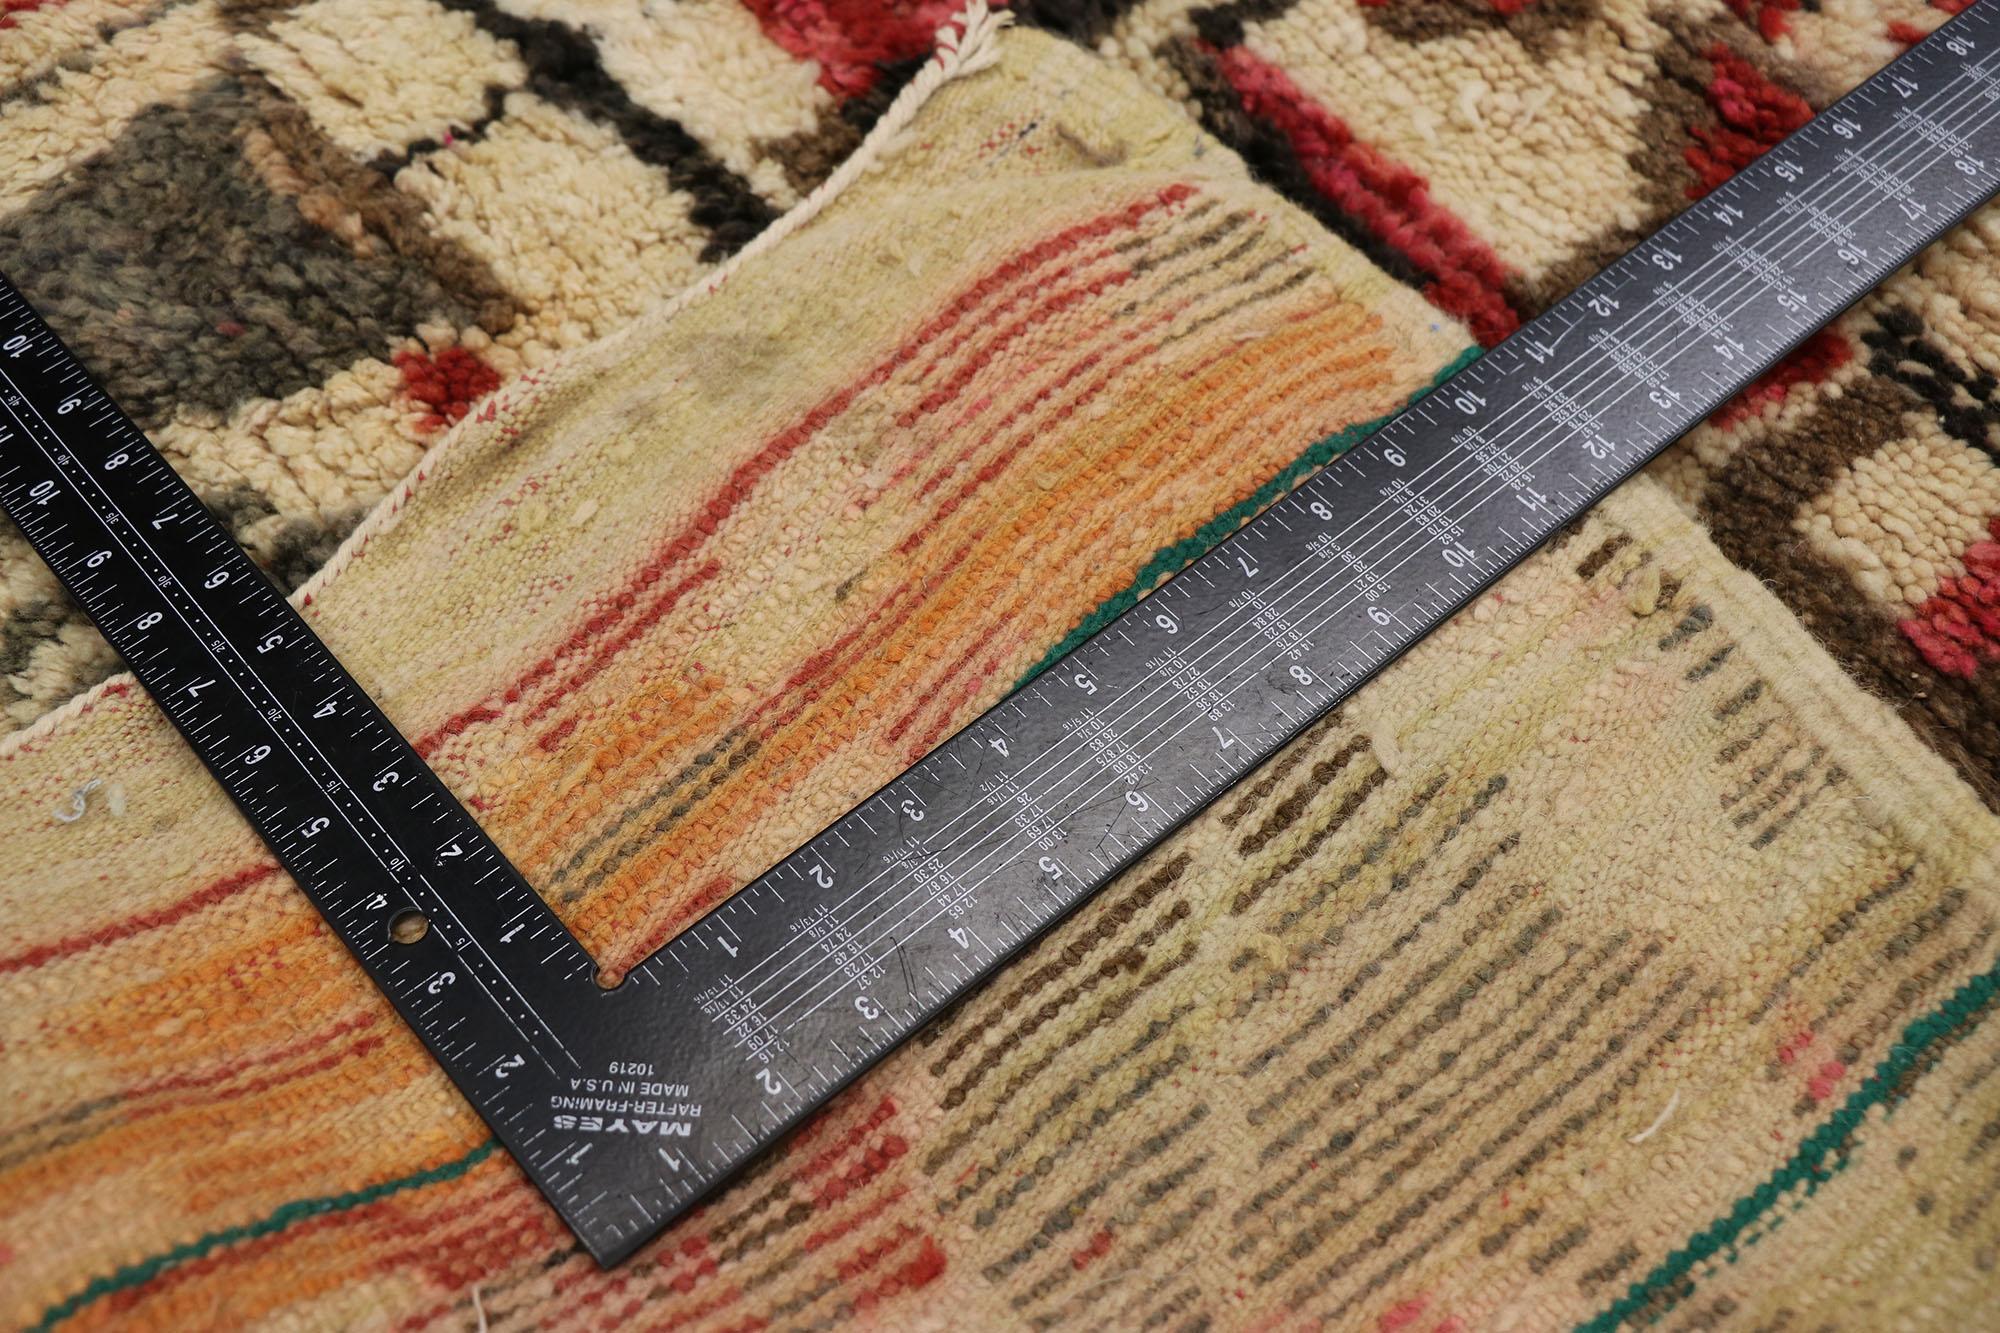 Vintage Berber Moroccan Rug with Bauhaus Style In Good Condition For Sale In Dallas, TX